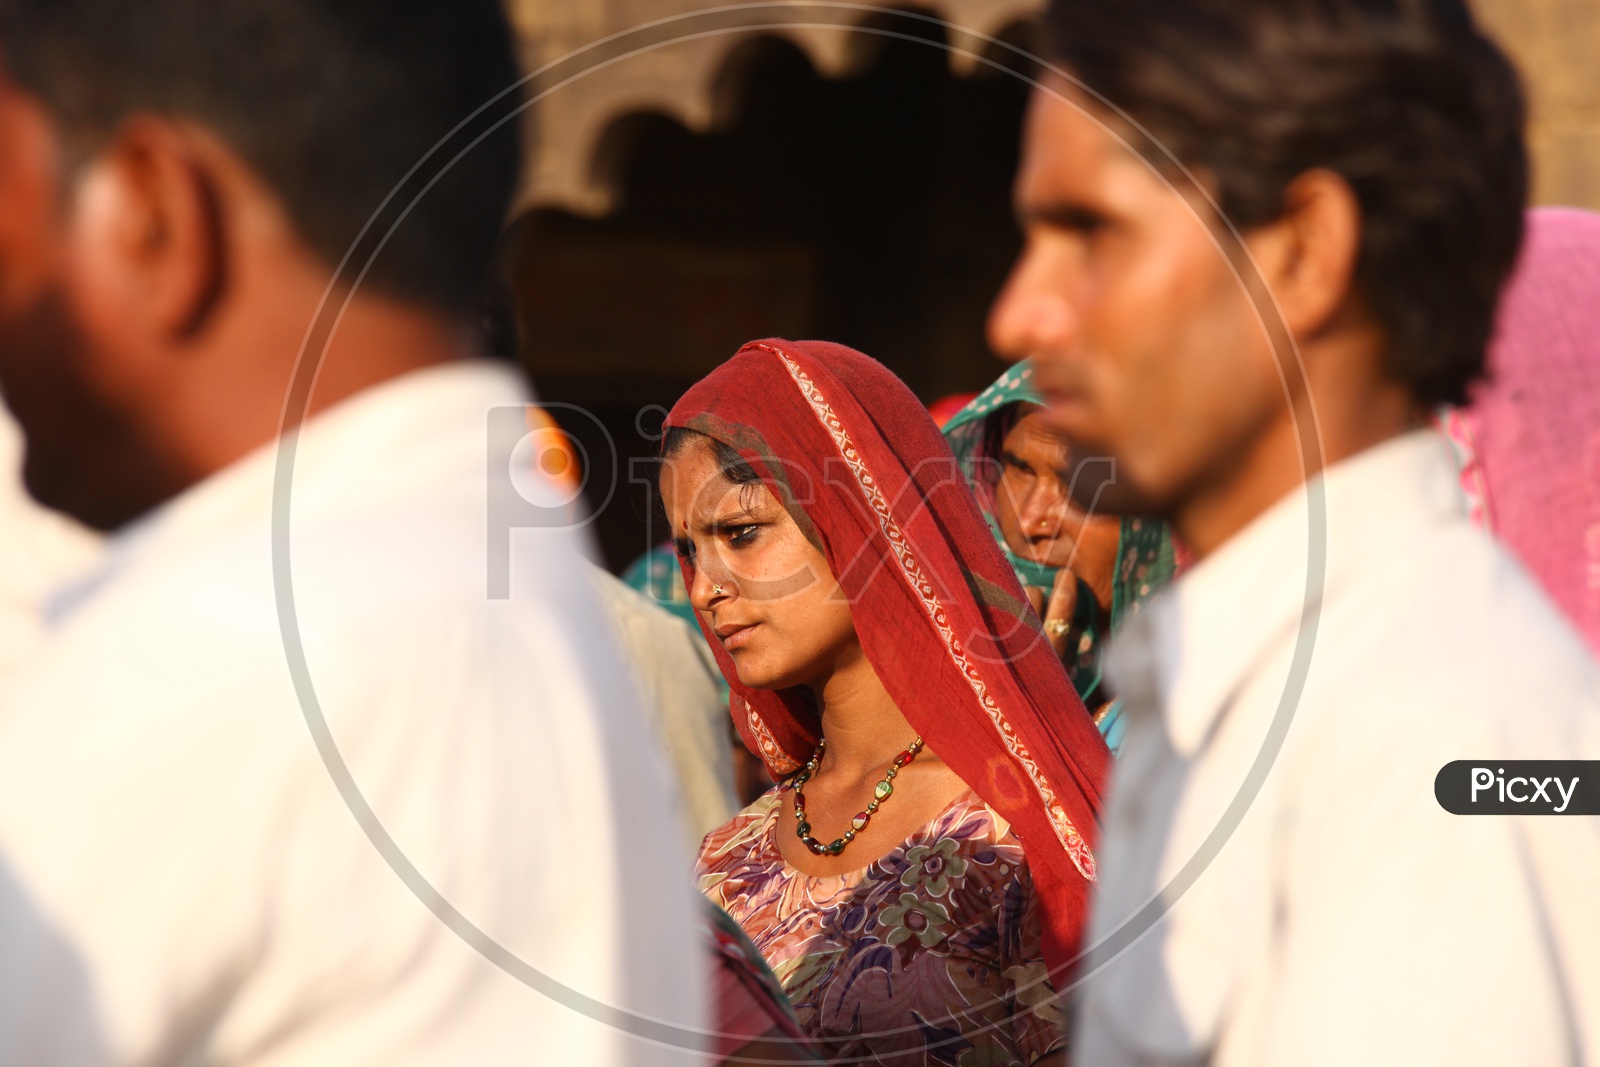 An Young Rajasthani Woman in a Crowd